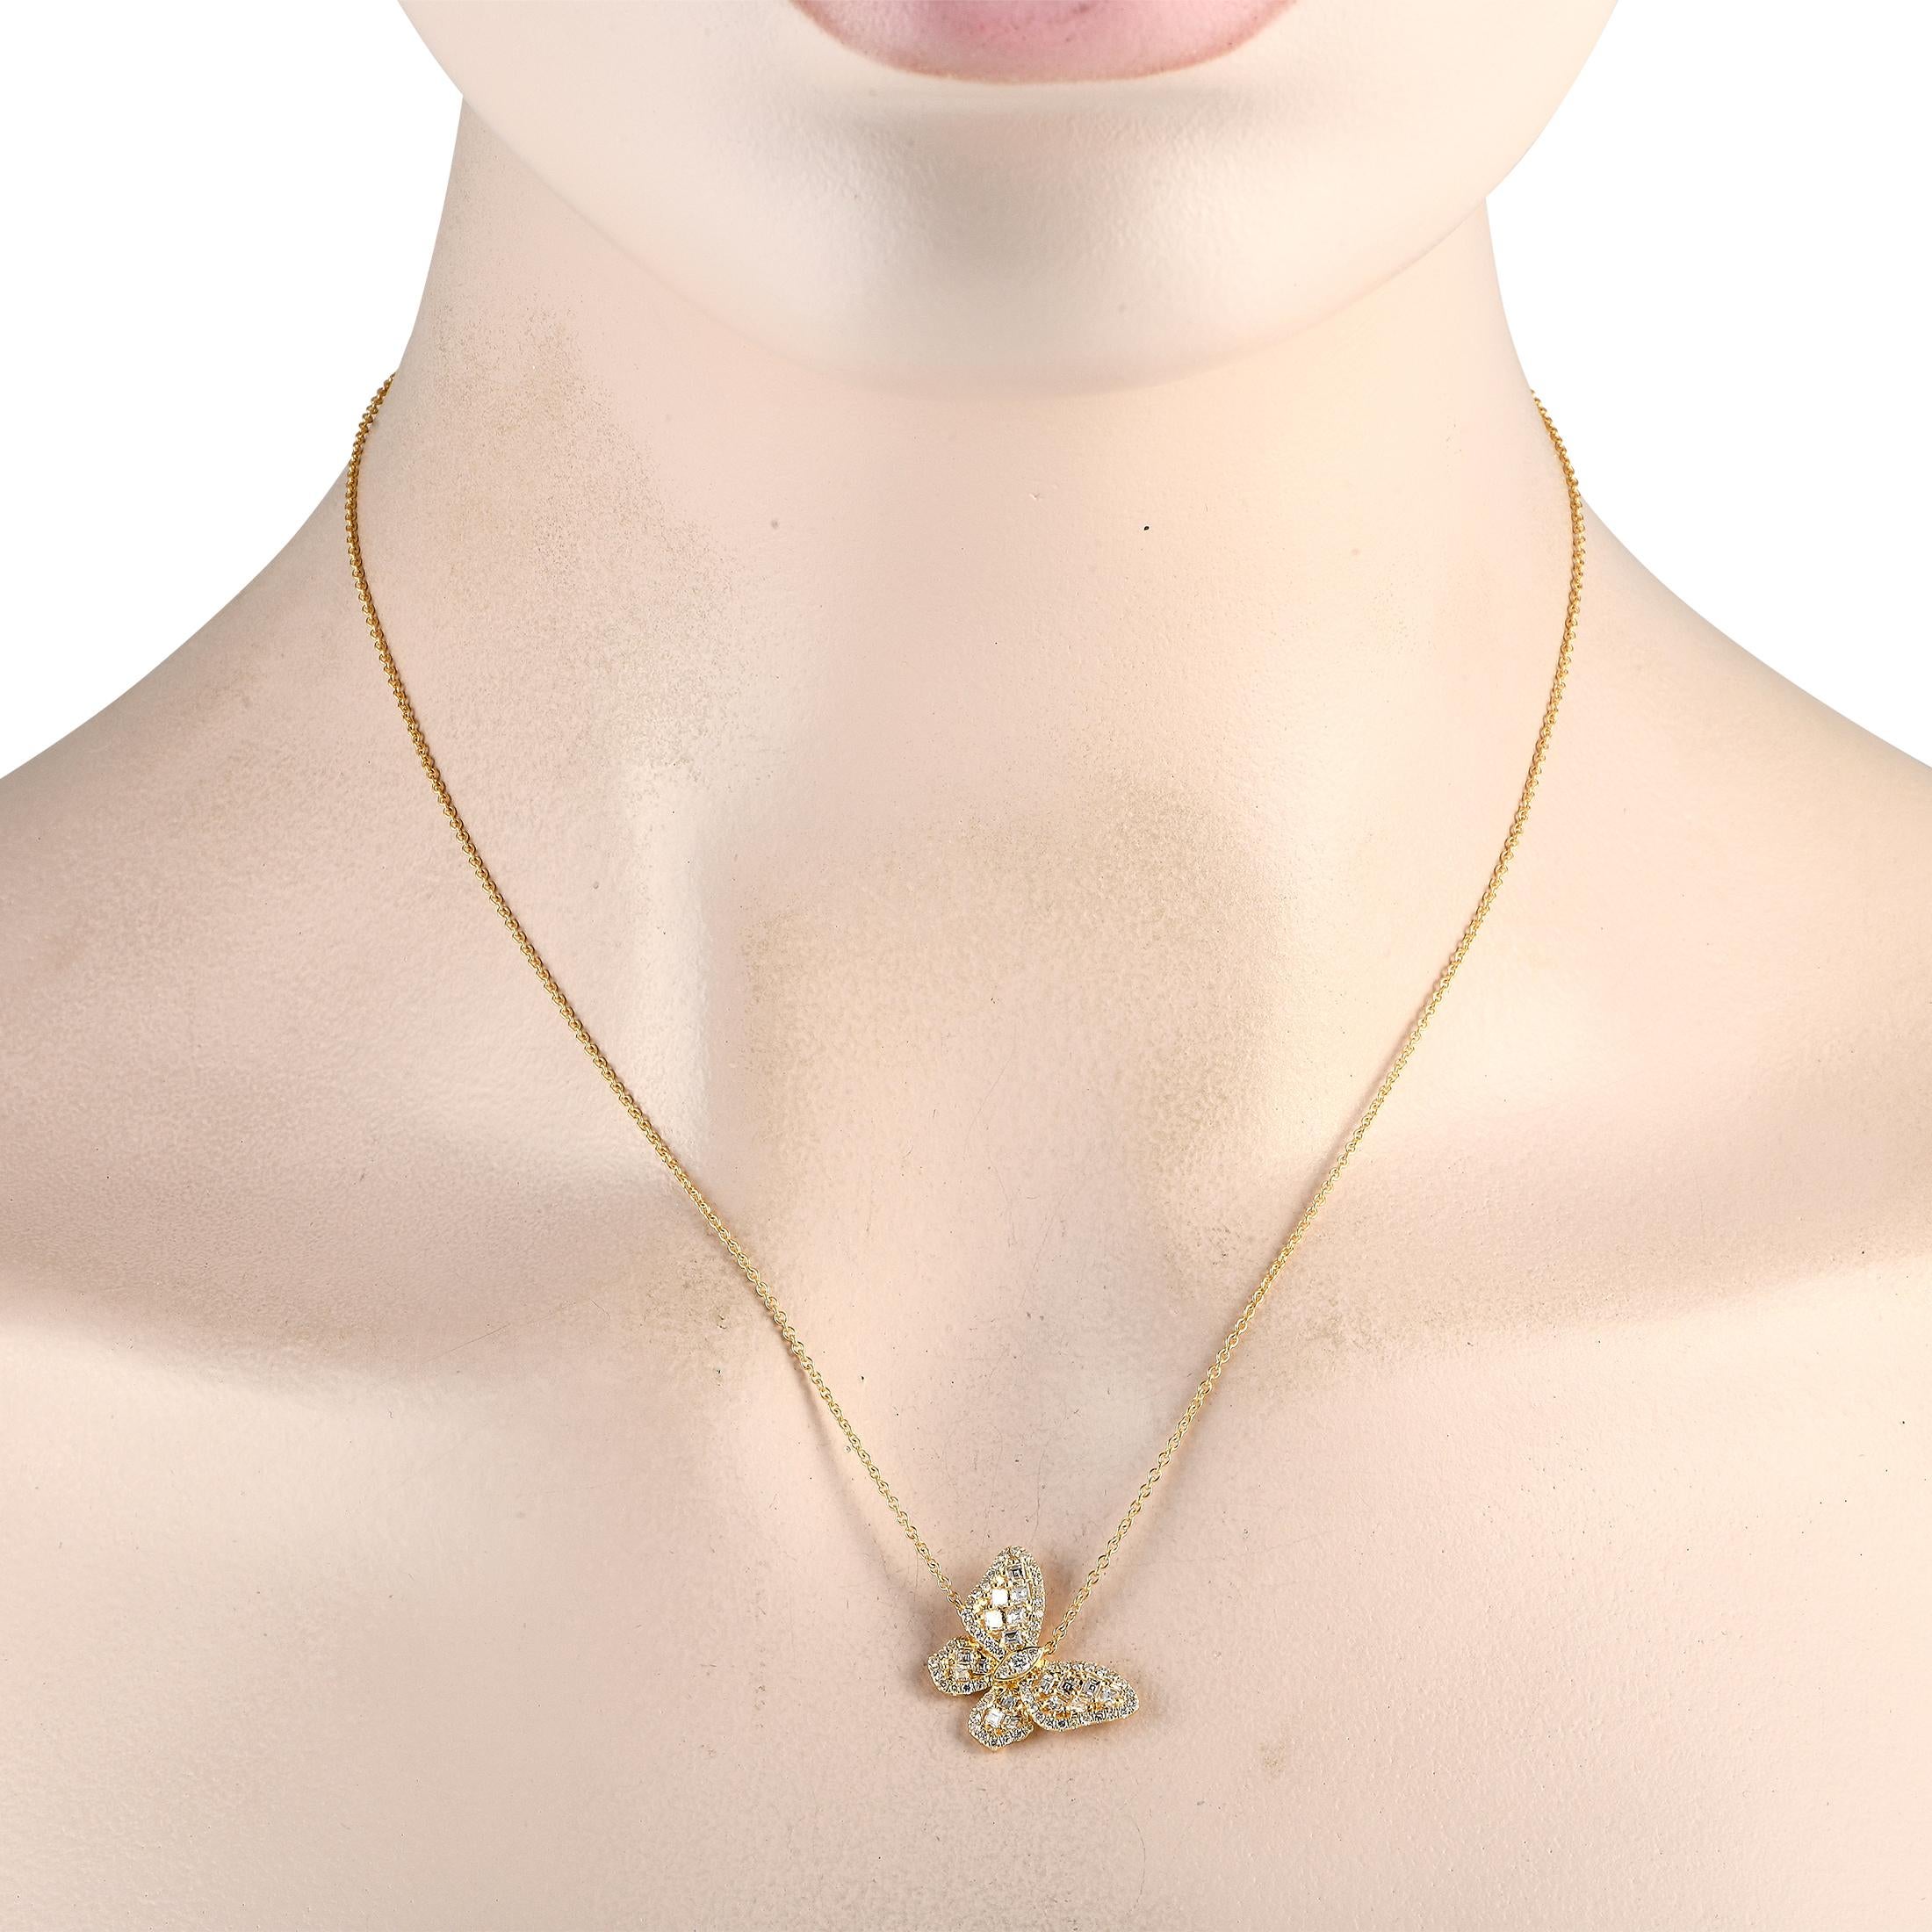 Theres something captivating about this charming necklace. Suspended from a delicate 18 chain, youll find a breathtaking butterfly pendant crafted from 18K yellow gold that measures 0.75 round. Asscher-cut diamonds totaling 0.55 carats and